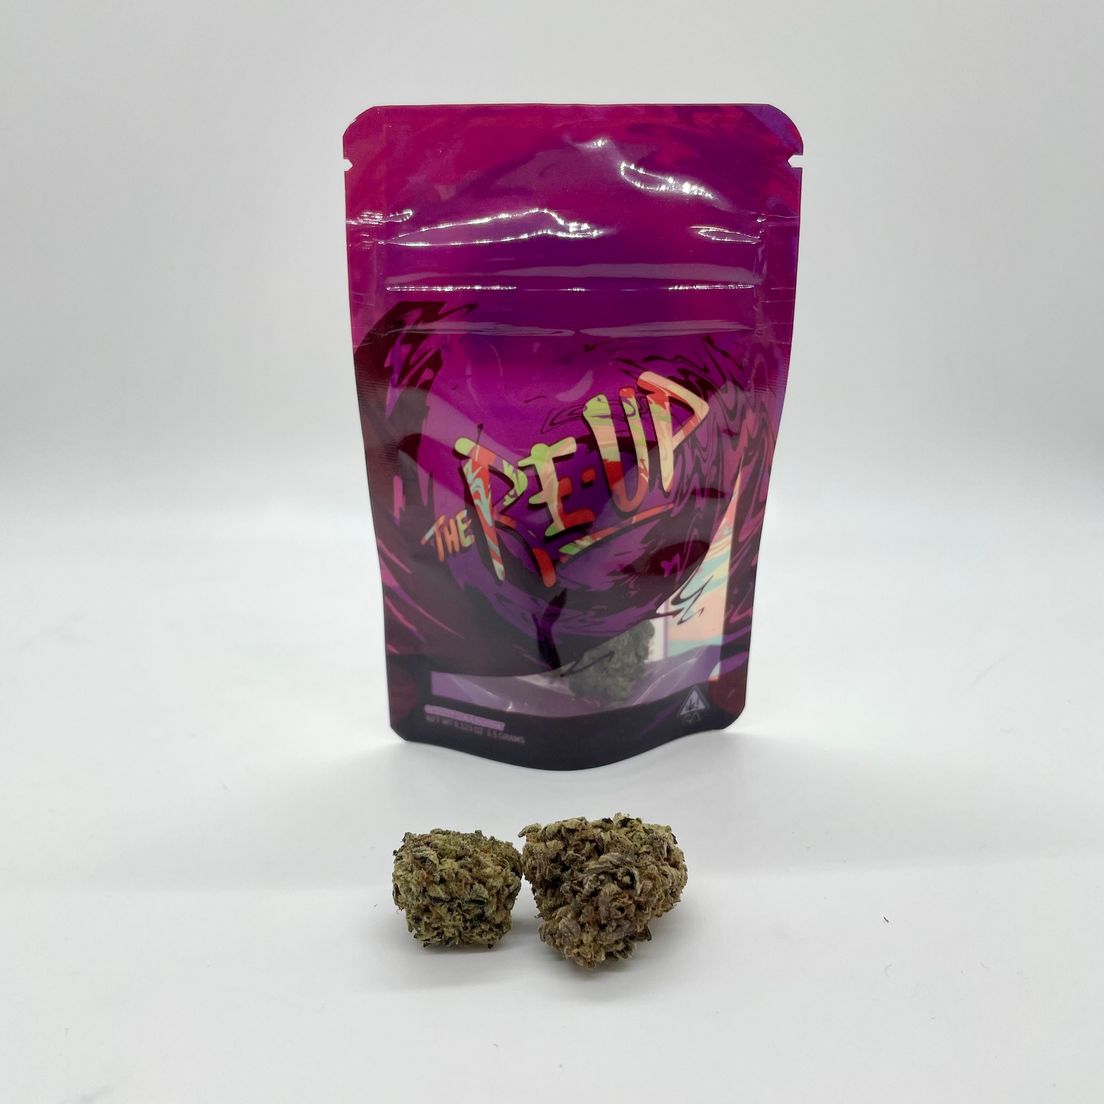 1/8 G-13 (33.67%/Indica) - The Re-Up